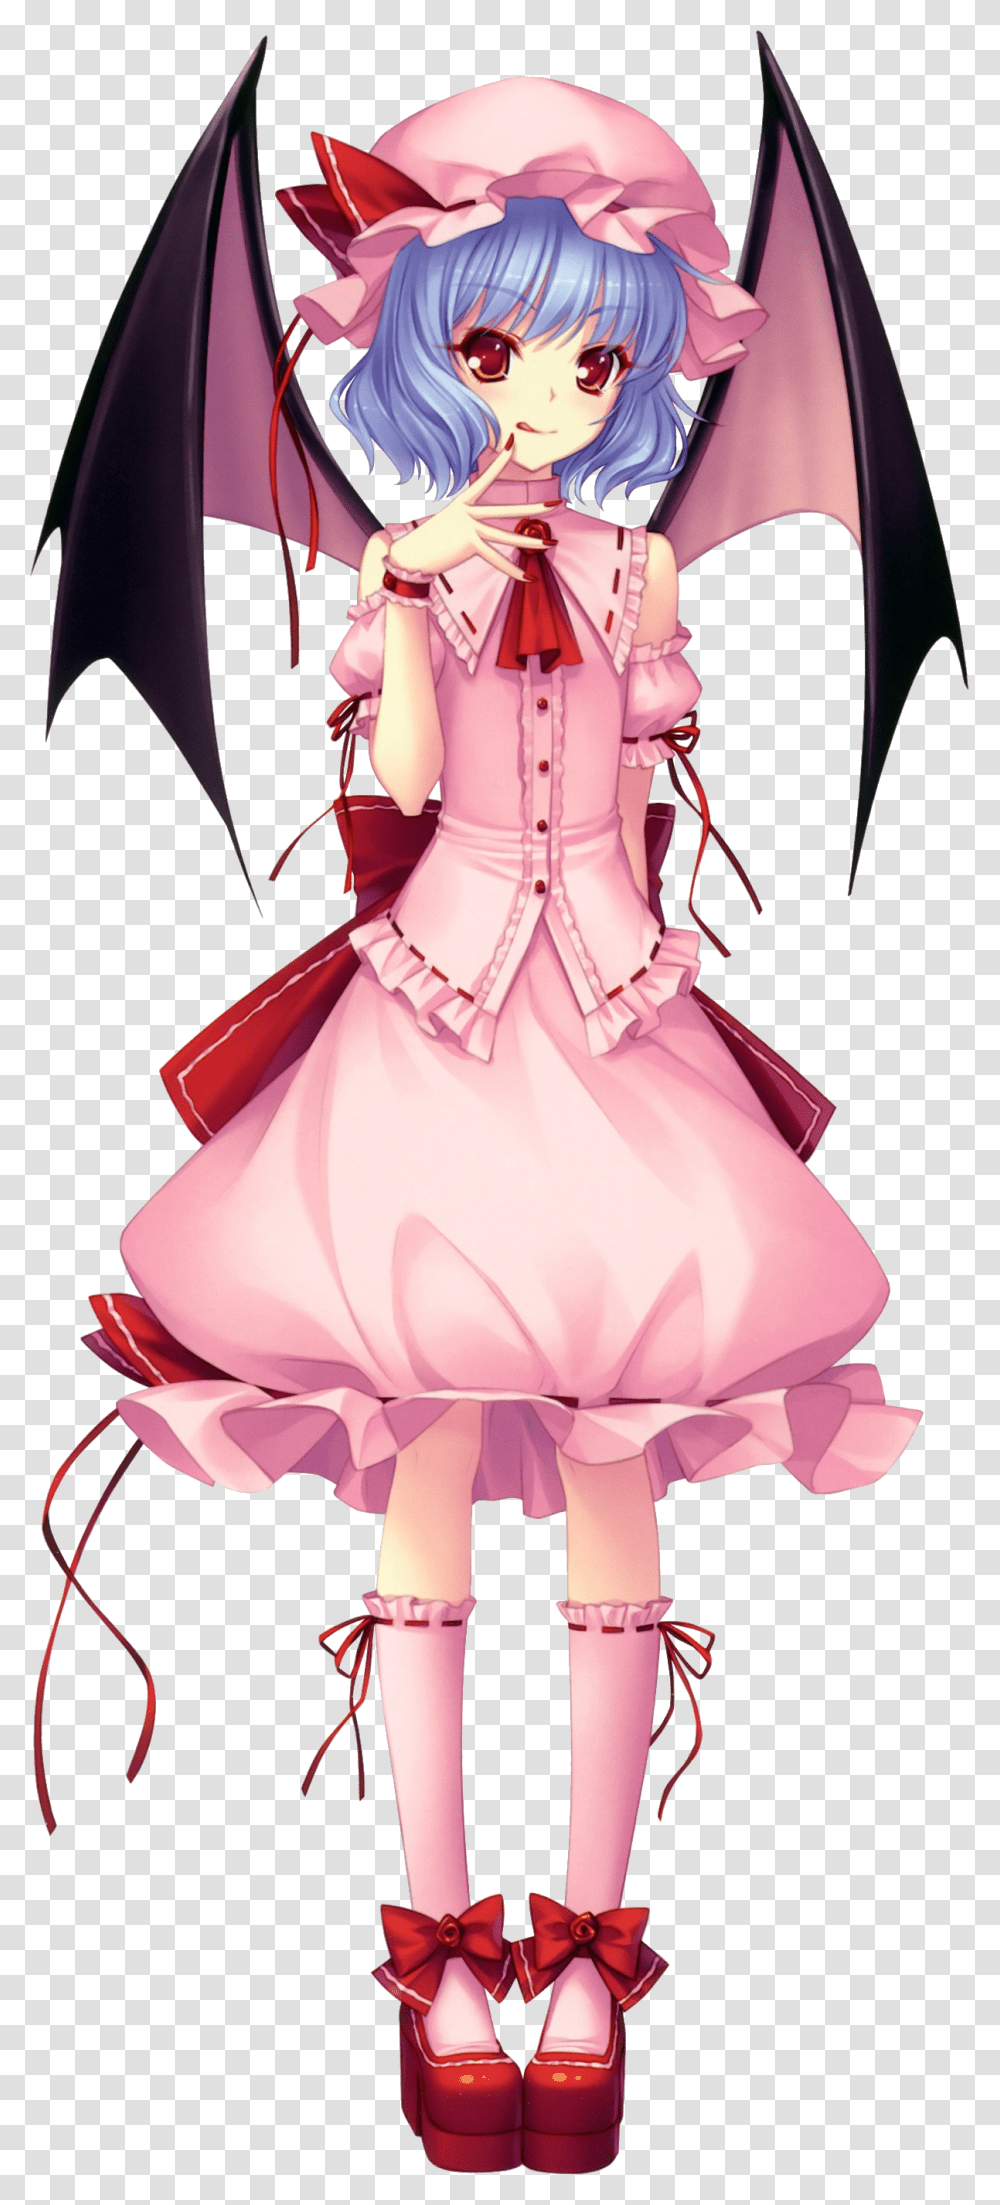 Remilia And Flandre Scarlet From Touhou Download Remilia Scarlet Render, Doll, Toy, Manga, Comics Transparent Png